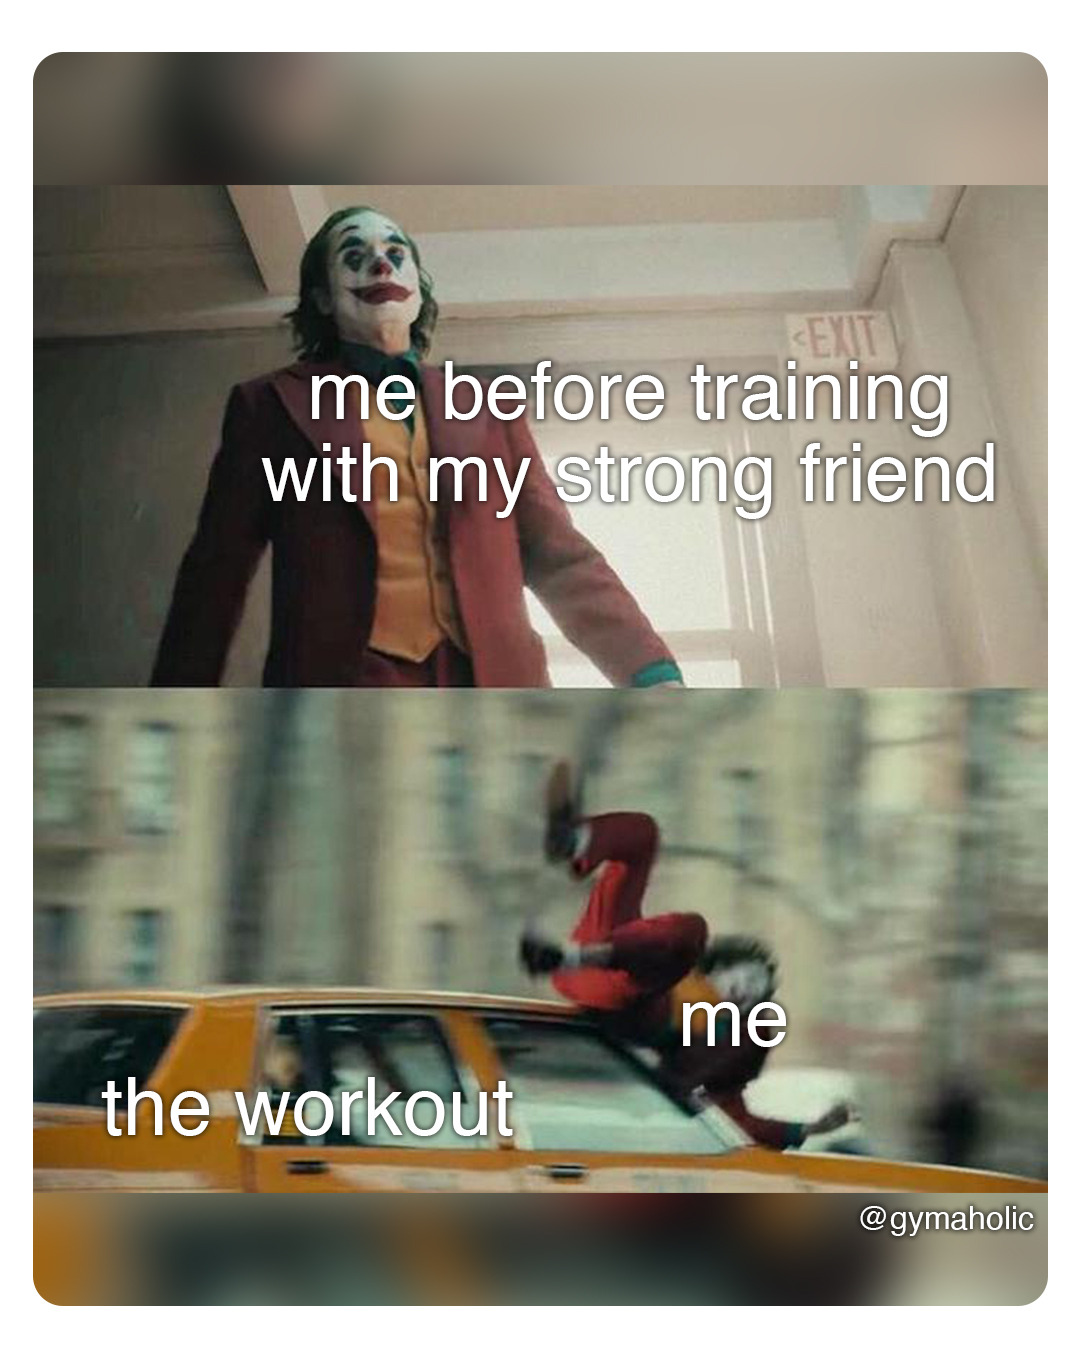 Me before training with my strong friend